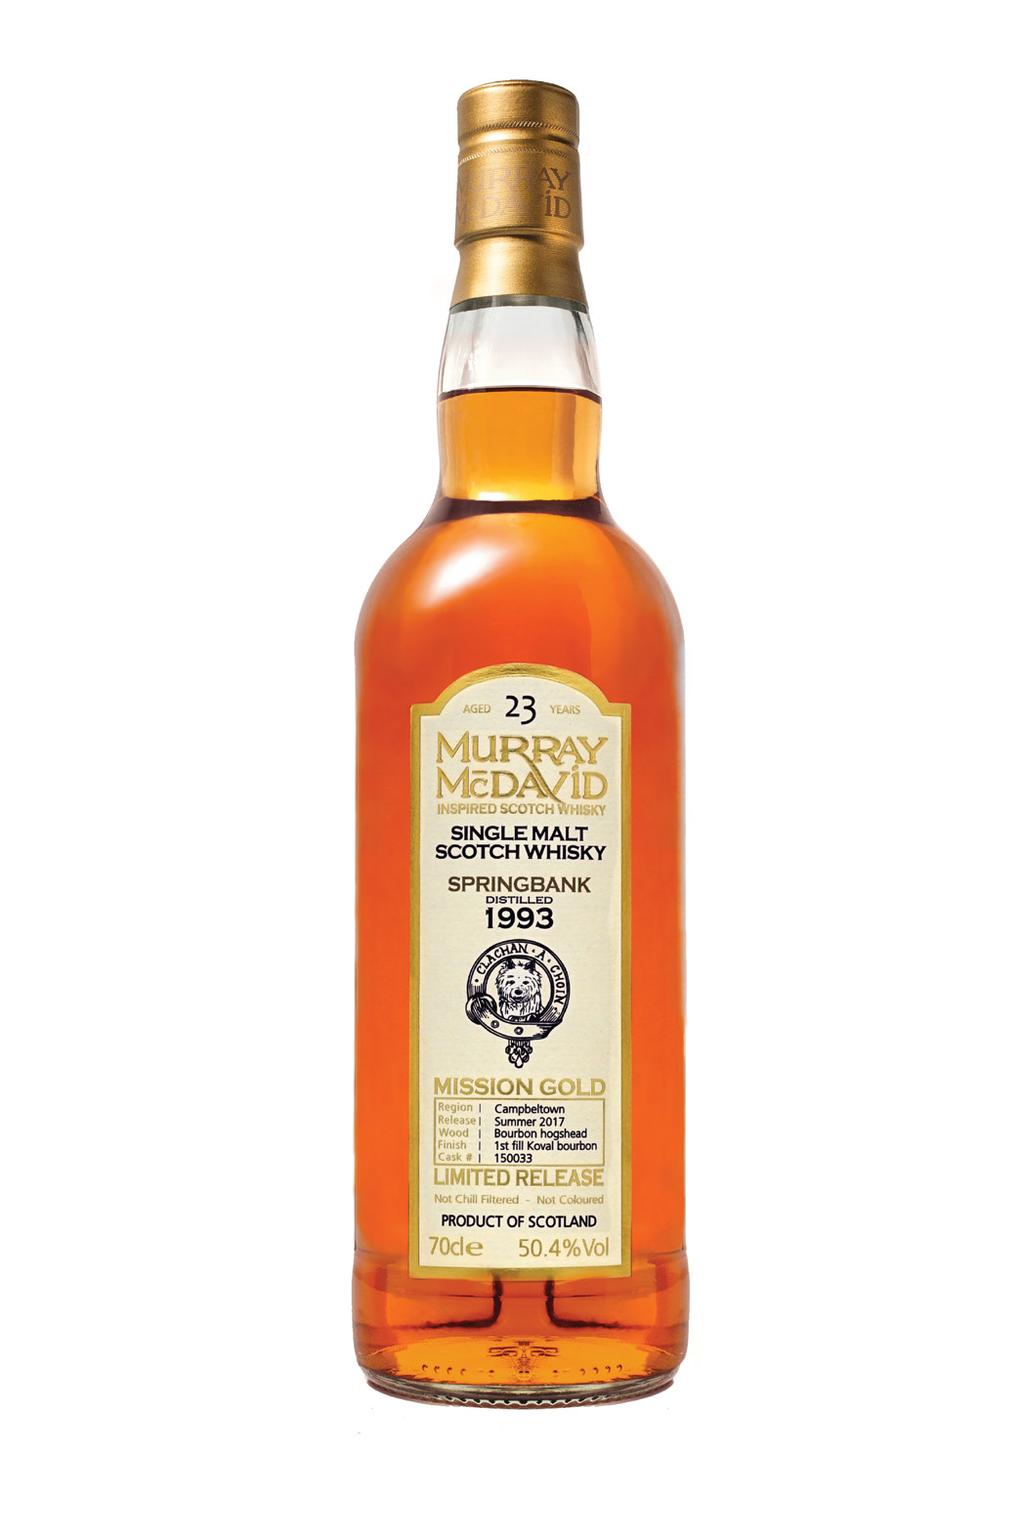 THE ART OF MATURATION MISSION GOLD SINGLE MALT SCOTCH WHISKY Our prestige collection of vintage, rare and exceptional single malts 23 MISSION GOLD SPRINGBANK 1993 SPRINGBANK This is a classic example